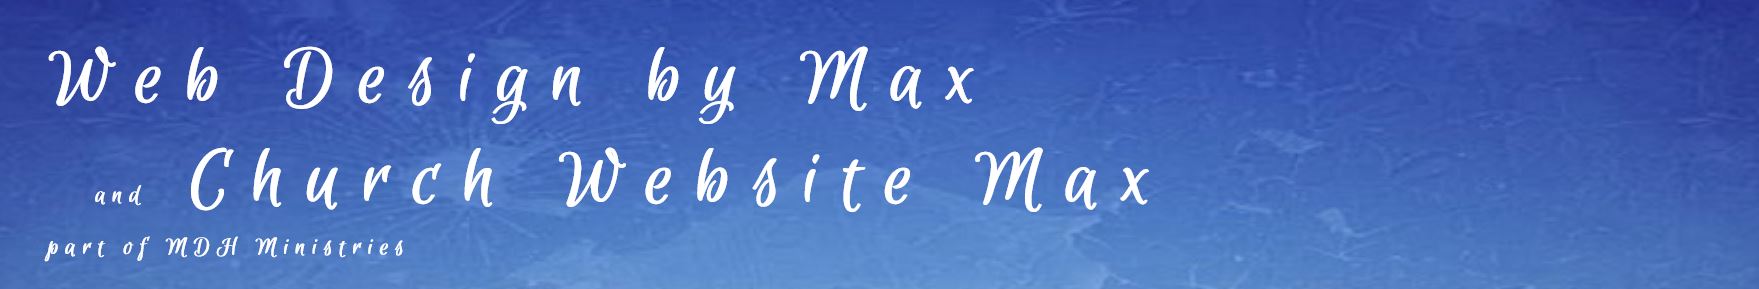 Web Design by Max and Church Website Max,  part of MDH Ministries